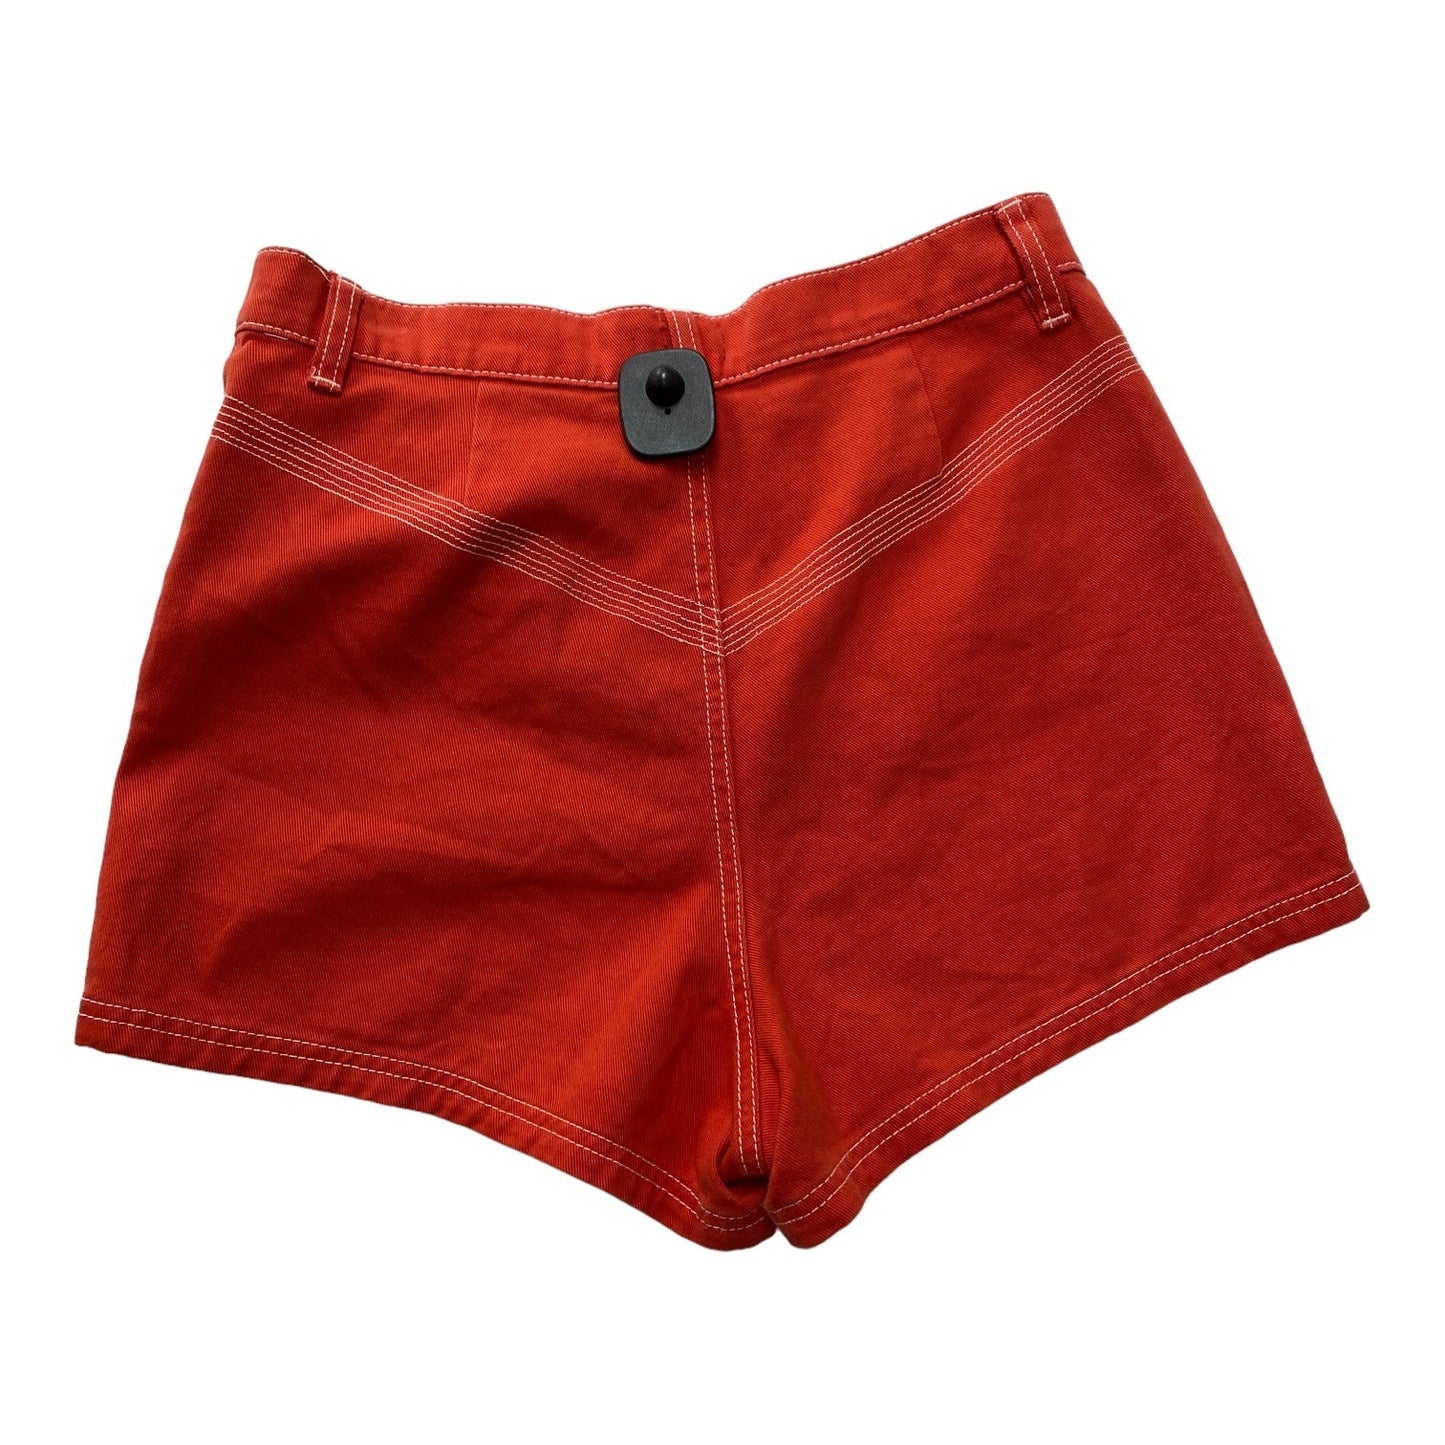 Shorts By Bdg  Size: 8